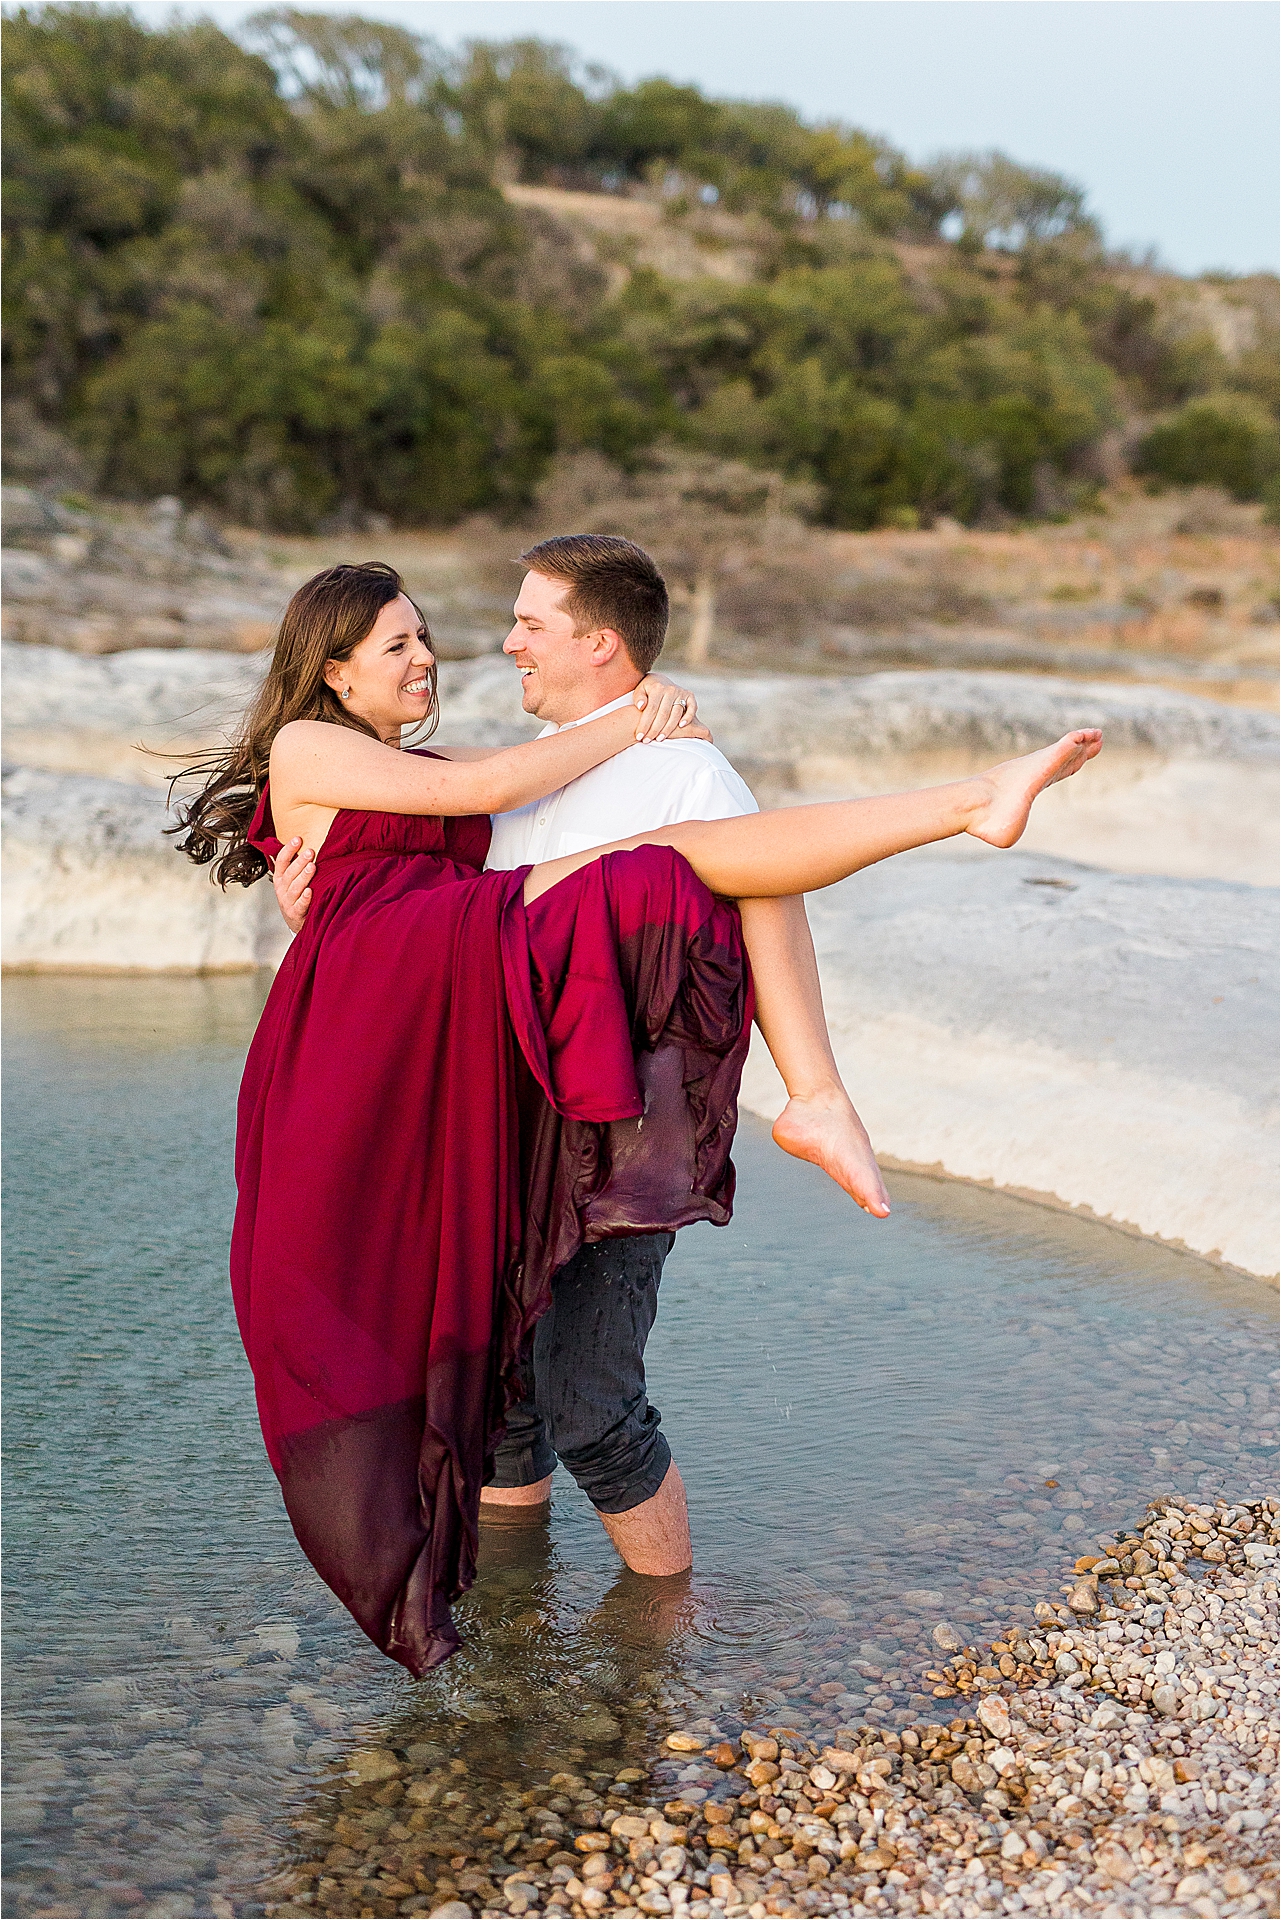 A groom lifts his bride to be in the water at Pedernales Falls State Park in the beautiful Texas Hill Country 